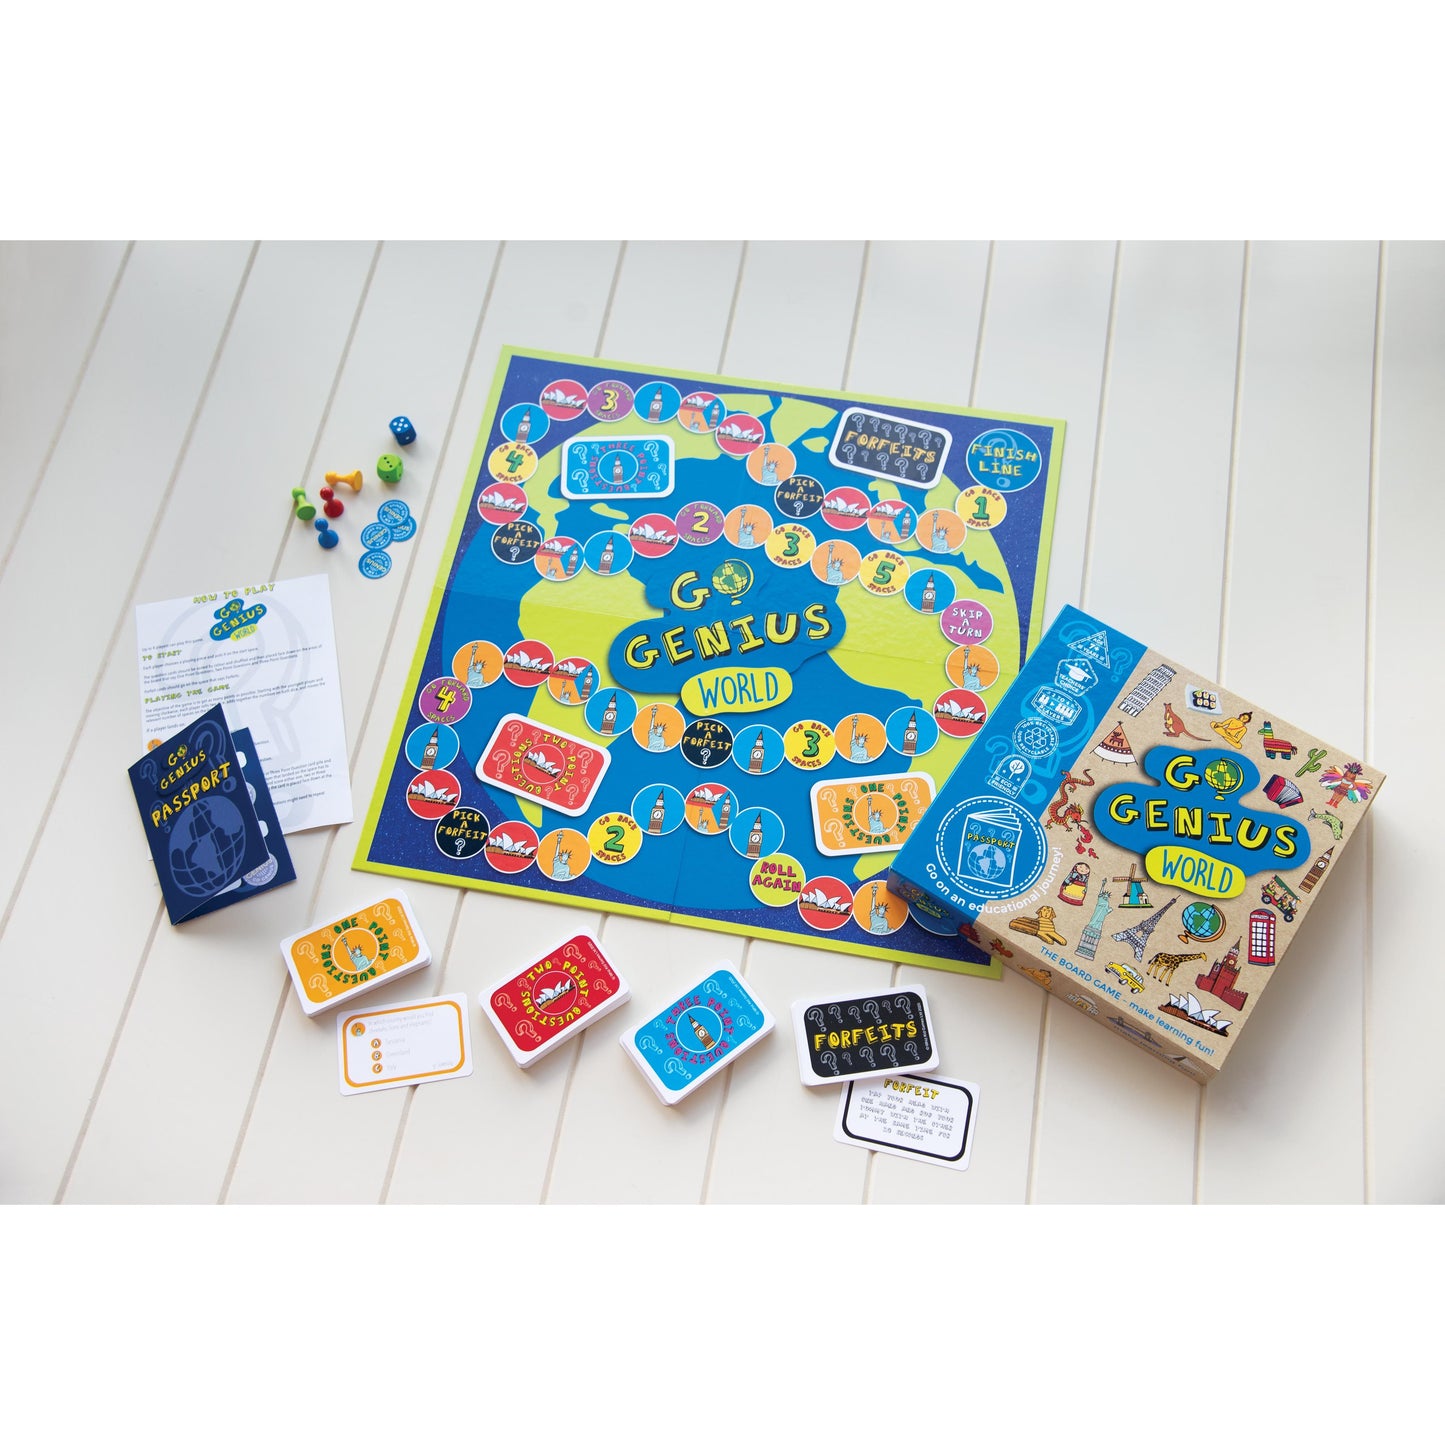 Go Genius World - The Board Game - Gifts R Us